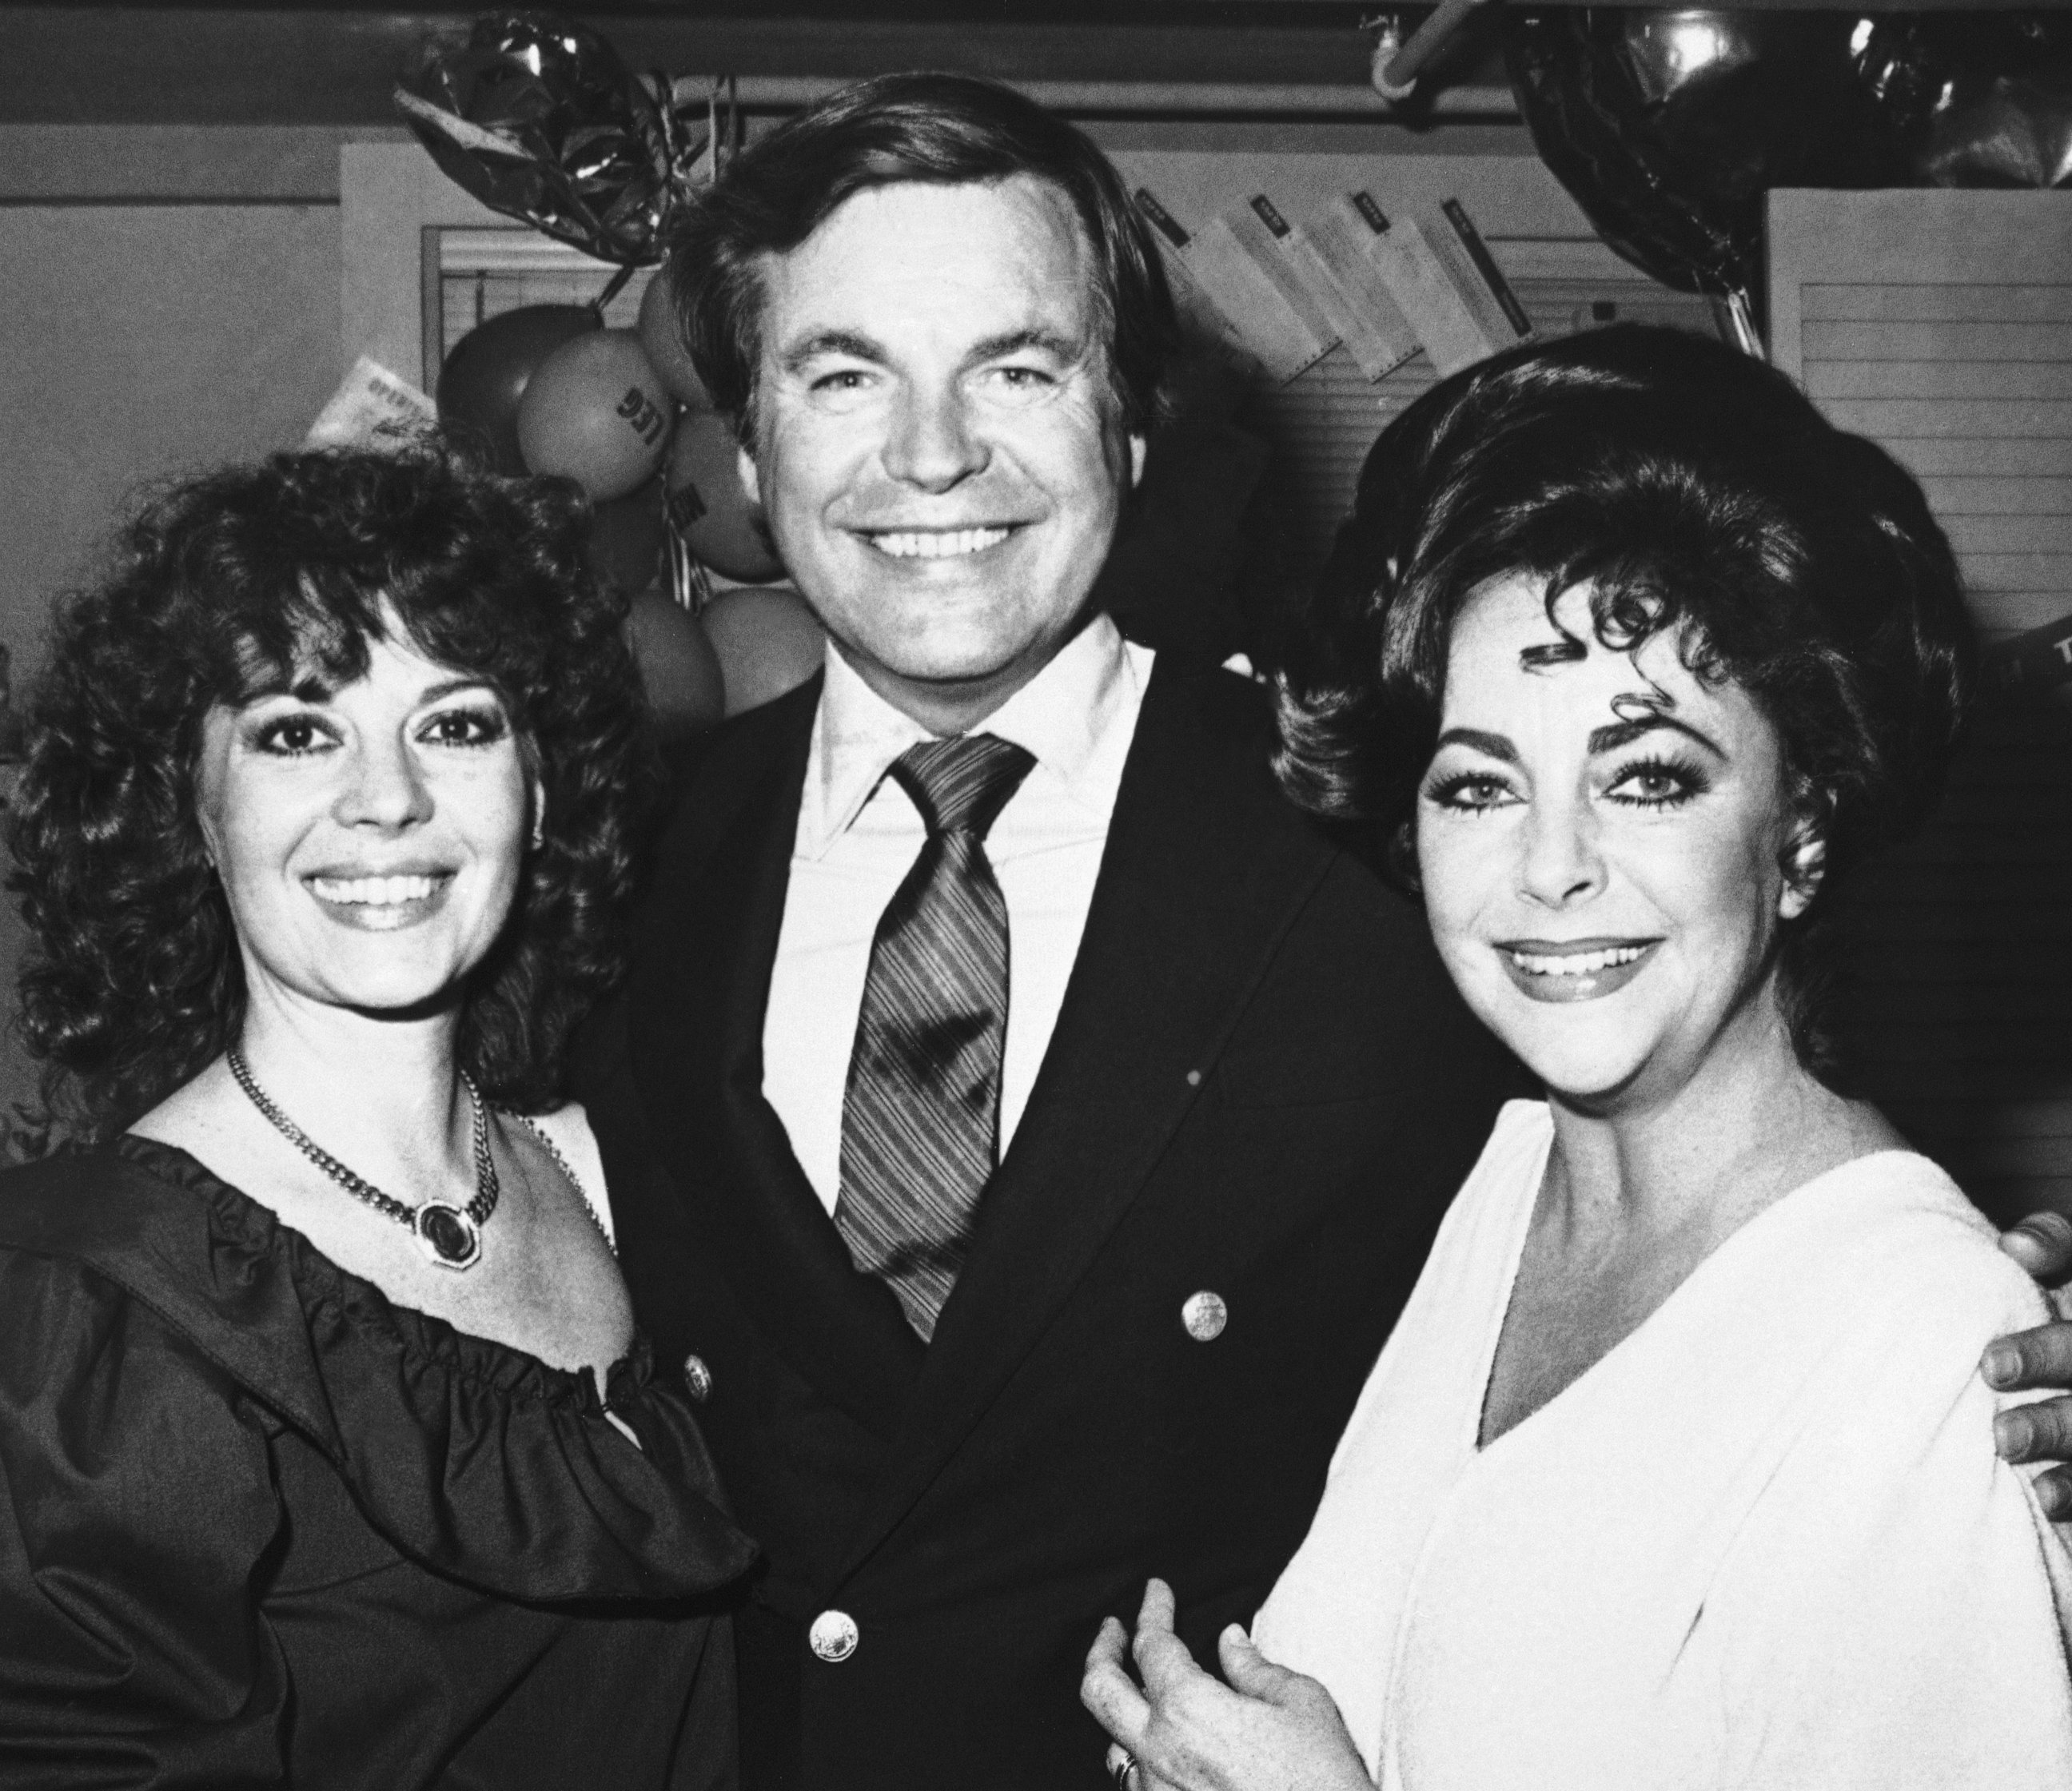 PHOTO: Actor Robert Wagner, center, and his wife, actress Natalie Wood, left, visit backstage with Elizabeth Taylor, June 18, 1981 in New York after seeing her star in the Broadway production of Lillian Hellman's play "The Little Foxes." 